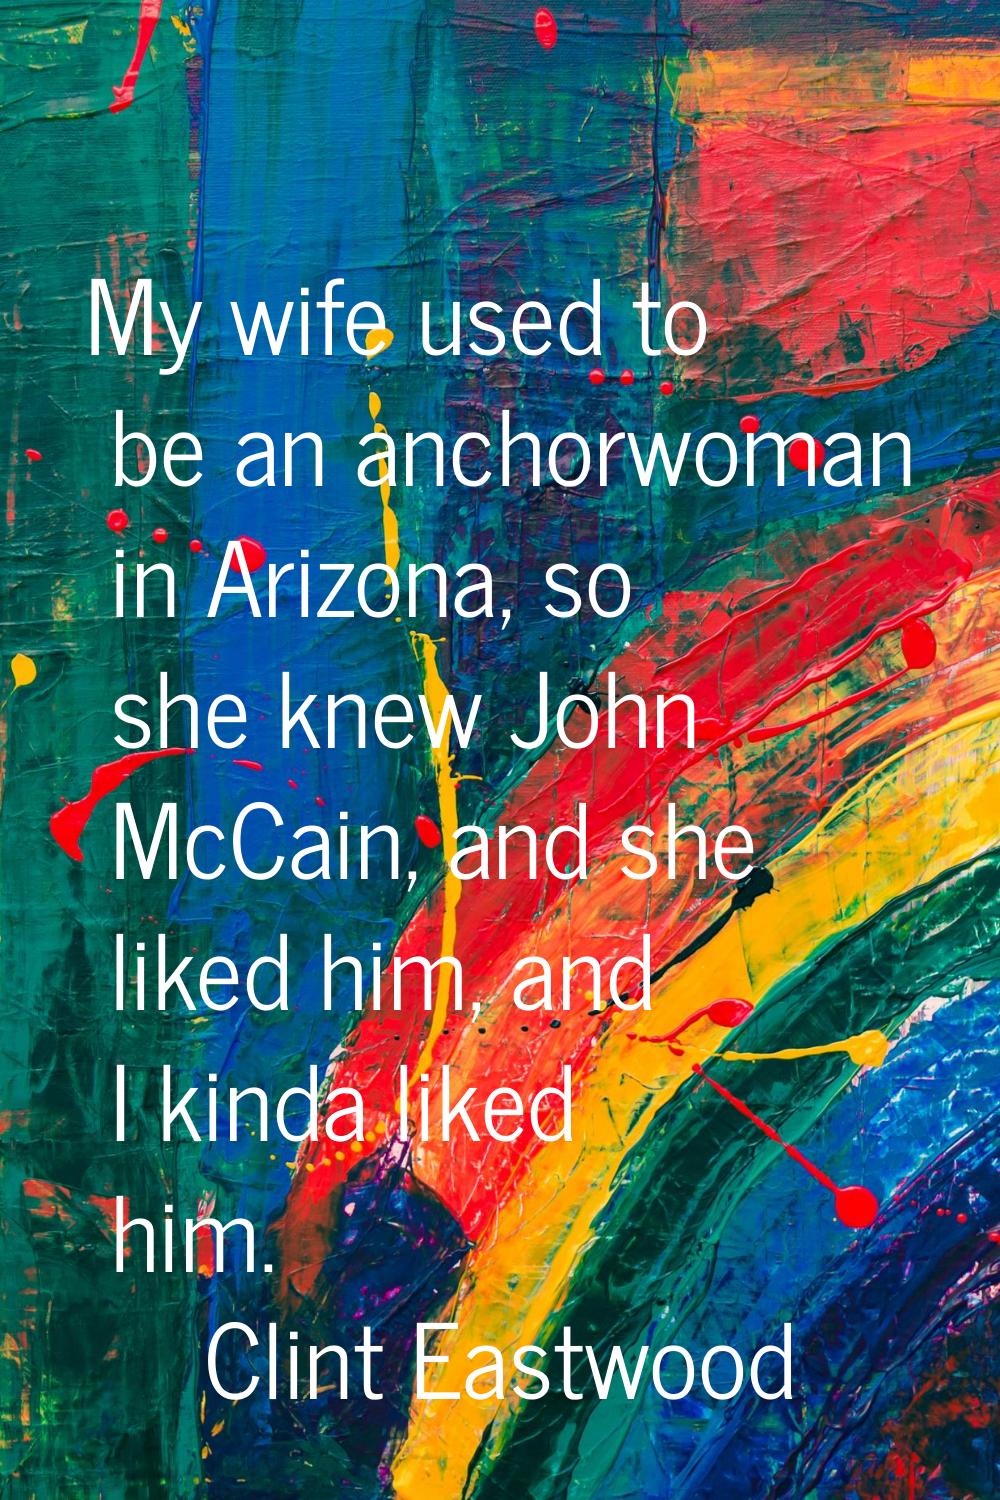 My wife used to be an anchorwoman in Arizona, so she knew John McCain, and she liked him, and I kin